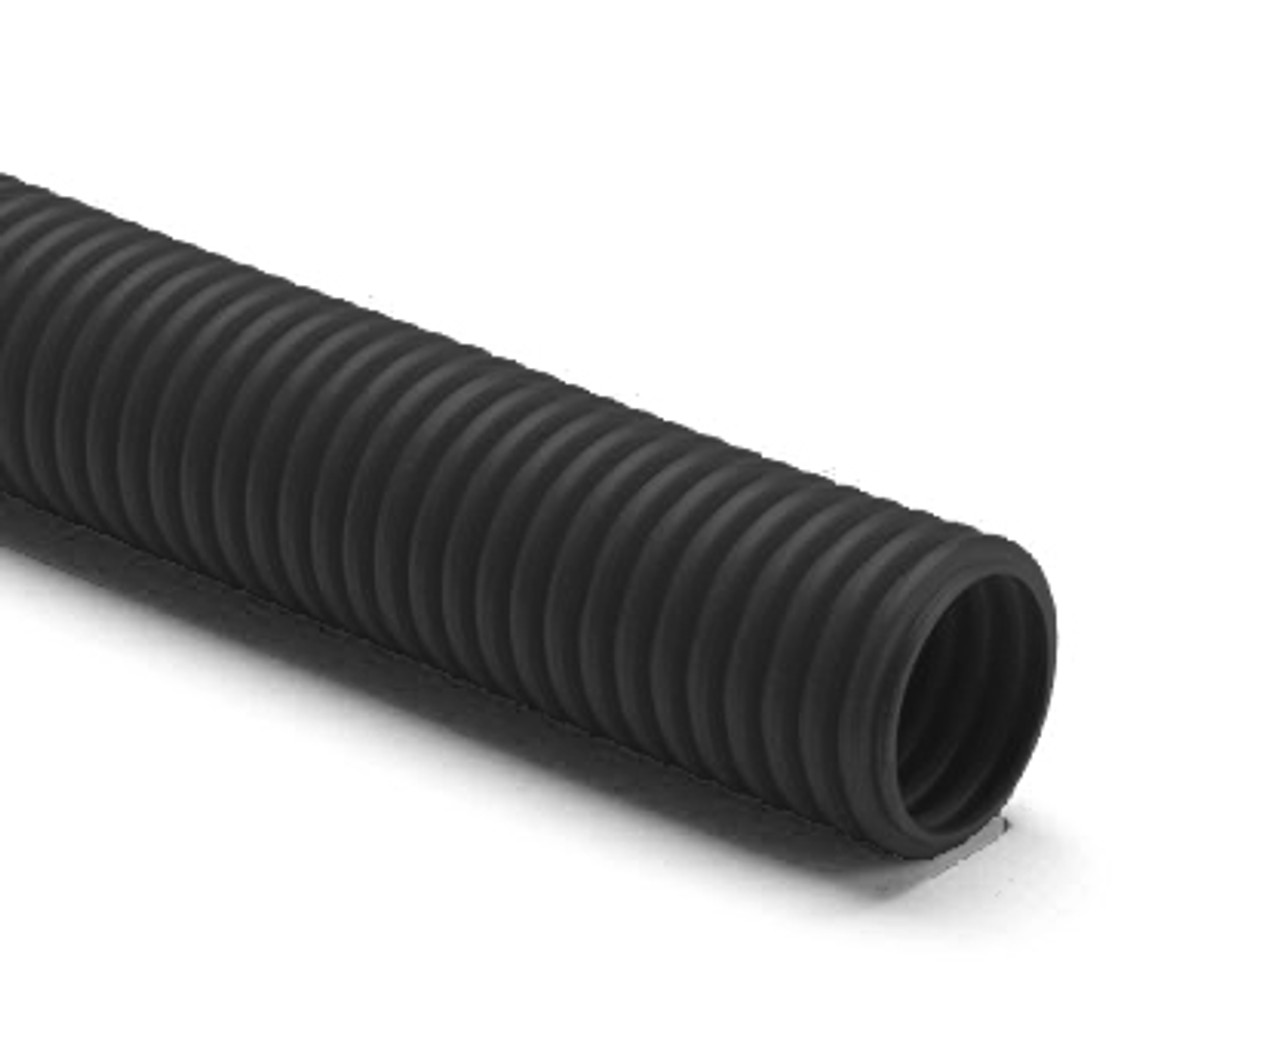 Black corrugated tube with thread puller diameter 25mm